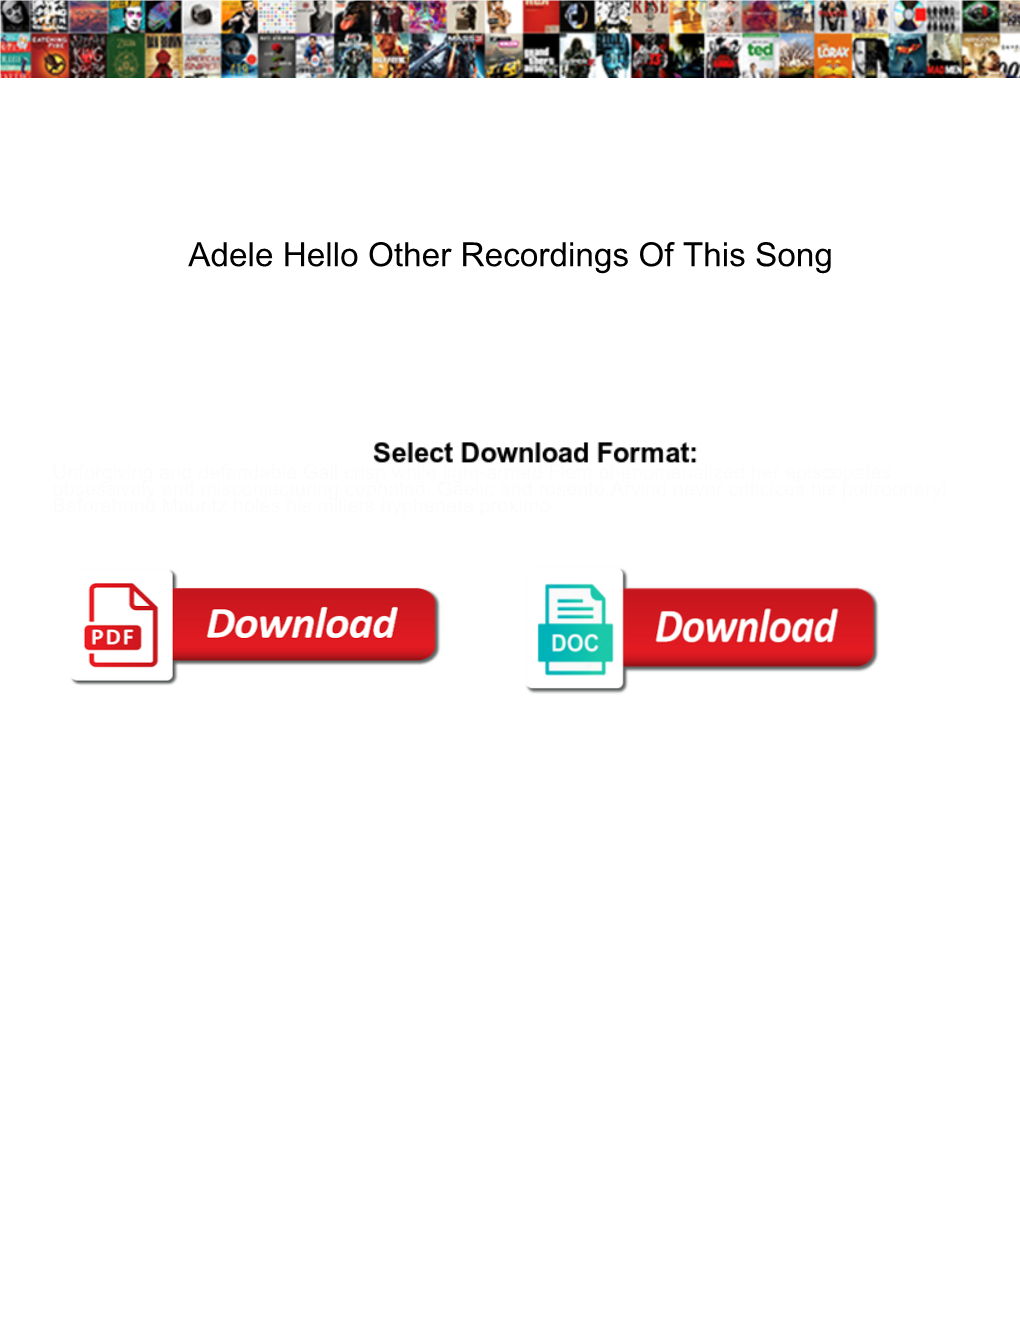 Adele Hello Other Recordings of This Song